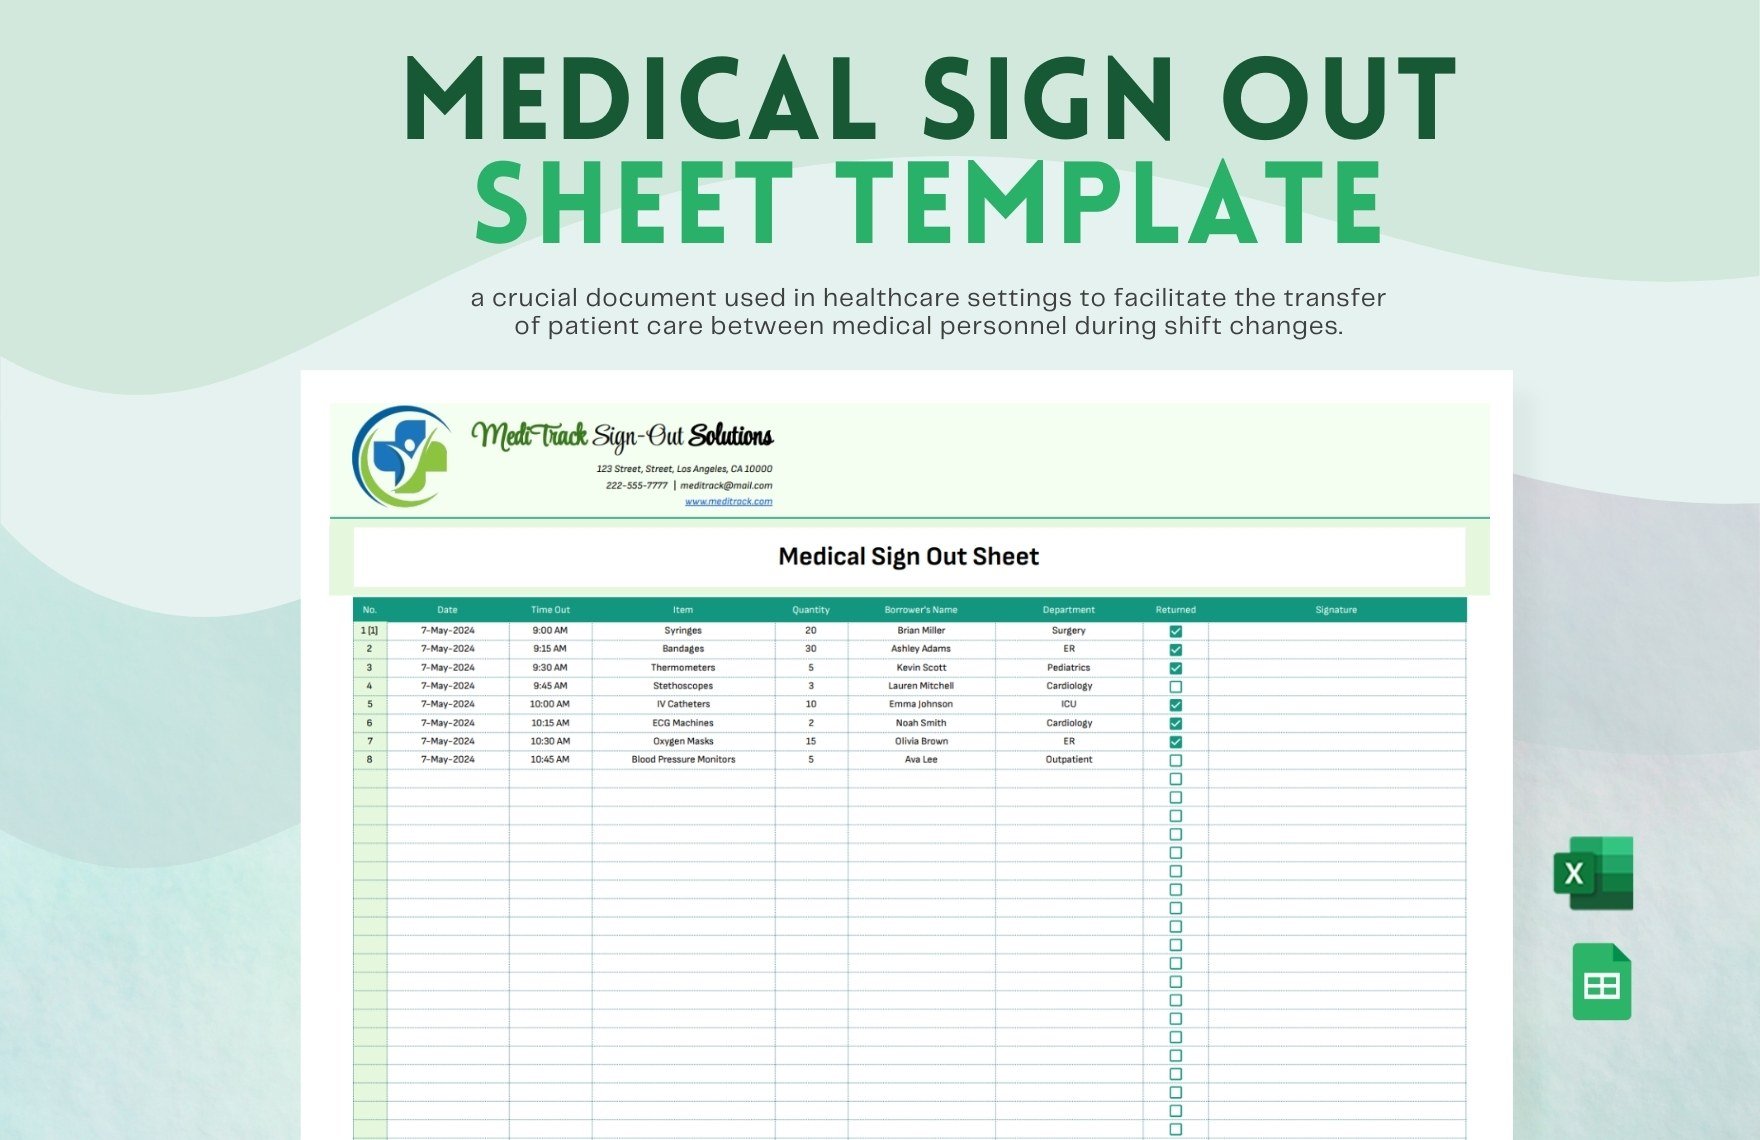 Medical Sign Out Sheet Template in Excel, Google Sheets